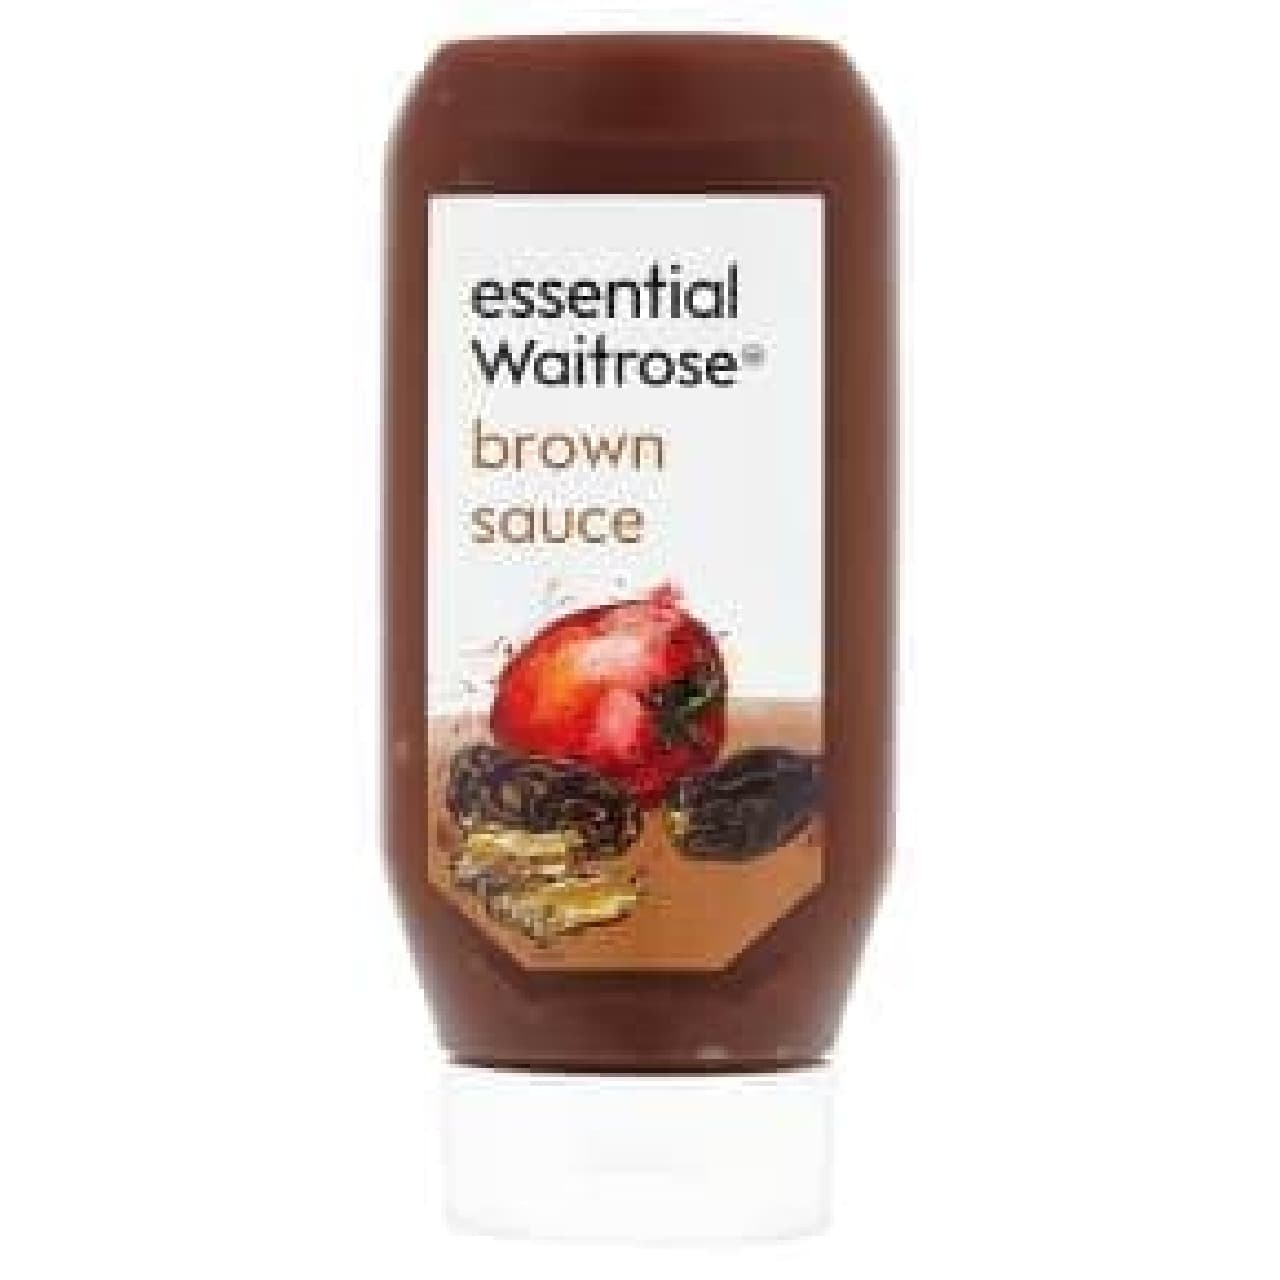 Conventional brown sauce: Certainly the picture is a little difficult to understand ...?